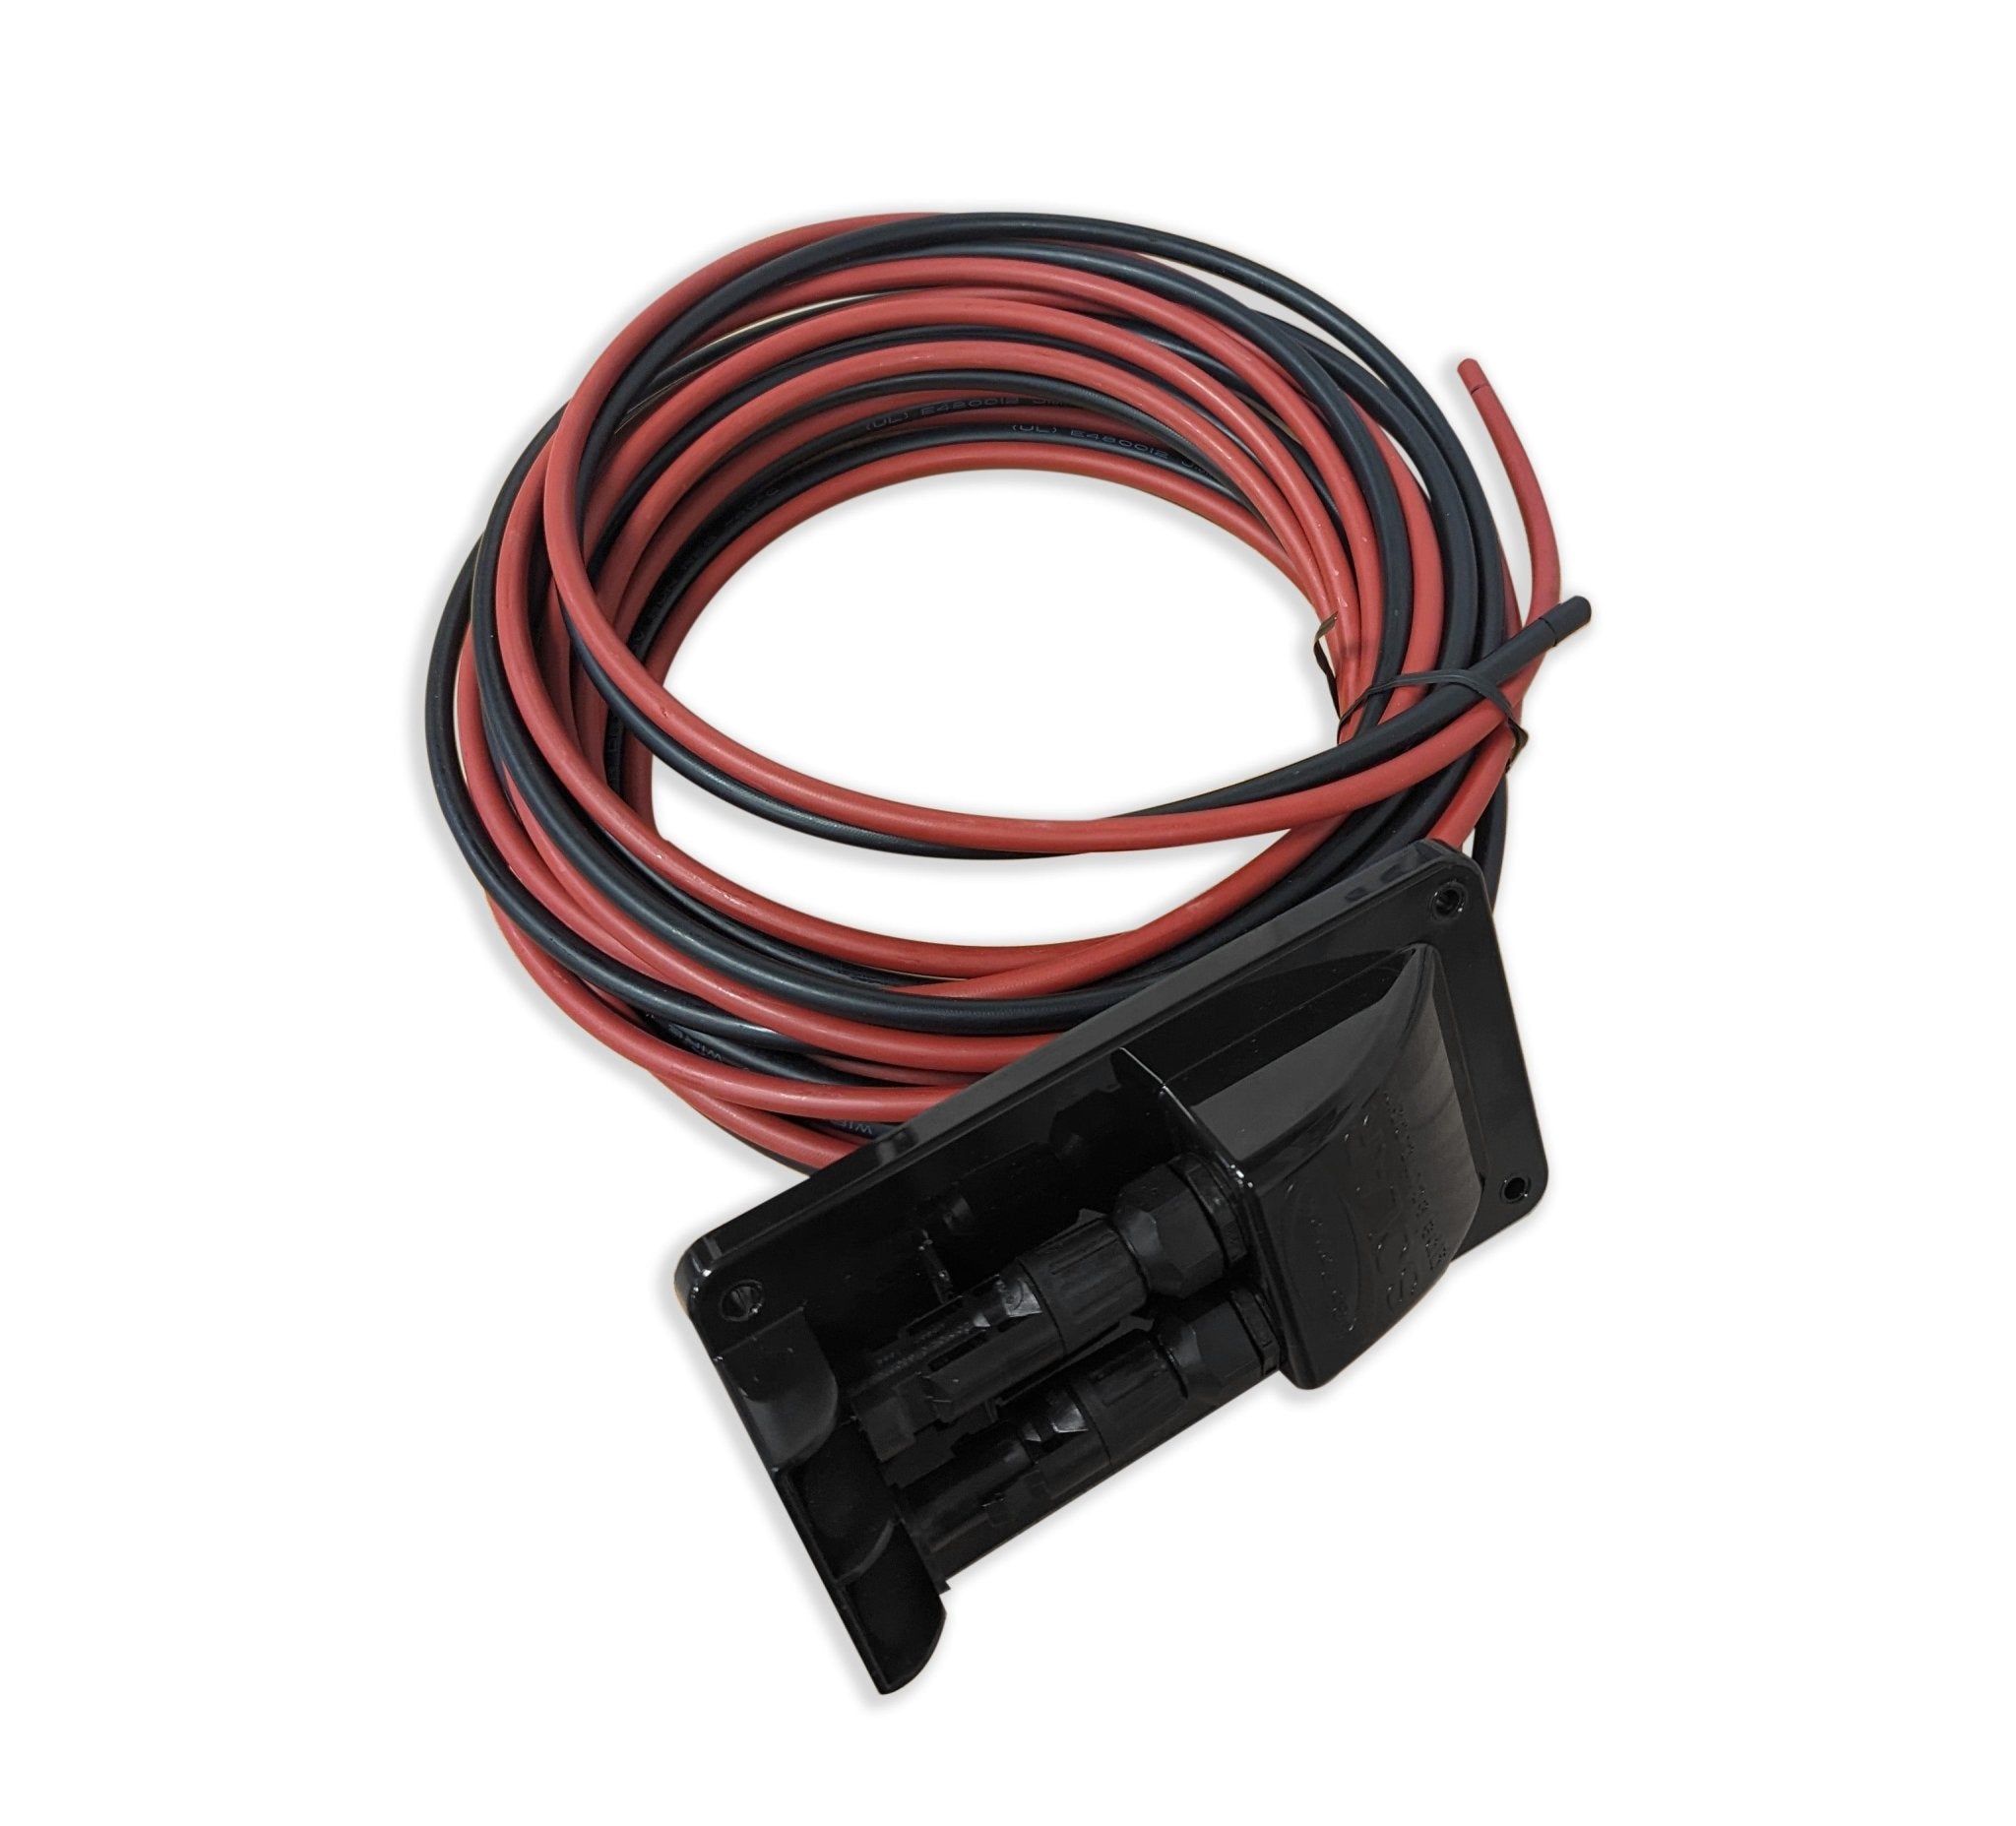 Go Power Solar Cable Entry Plate with Red and Black 25' SC Cables - Nomadic Cooling